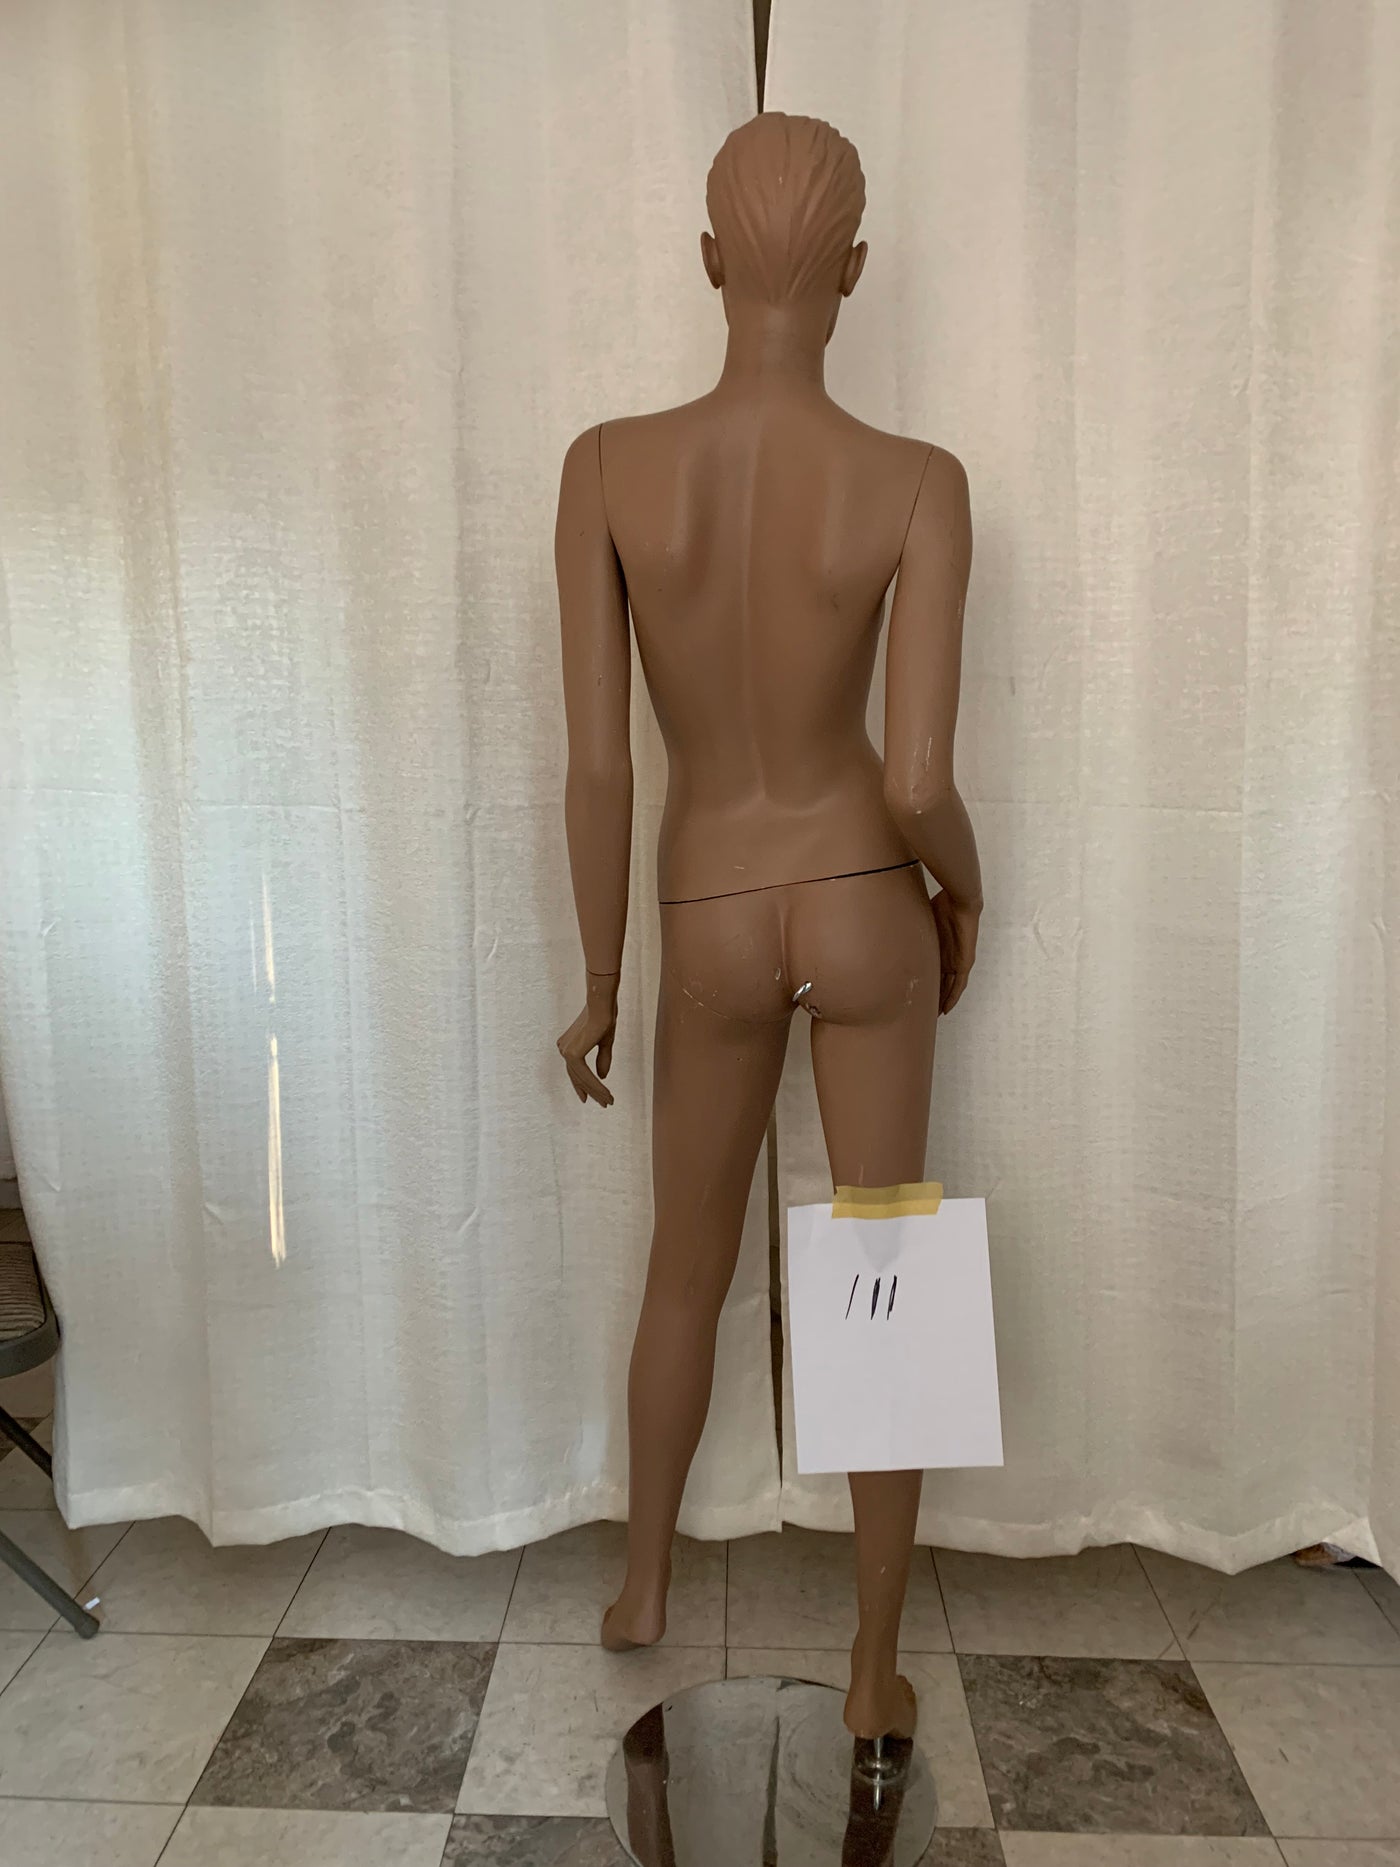 Used Female Adel Rootstein Mannequin #111 - Girl Thing